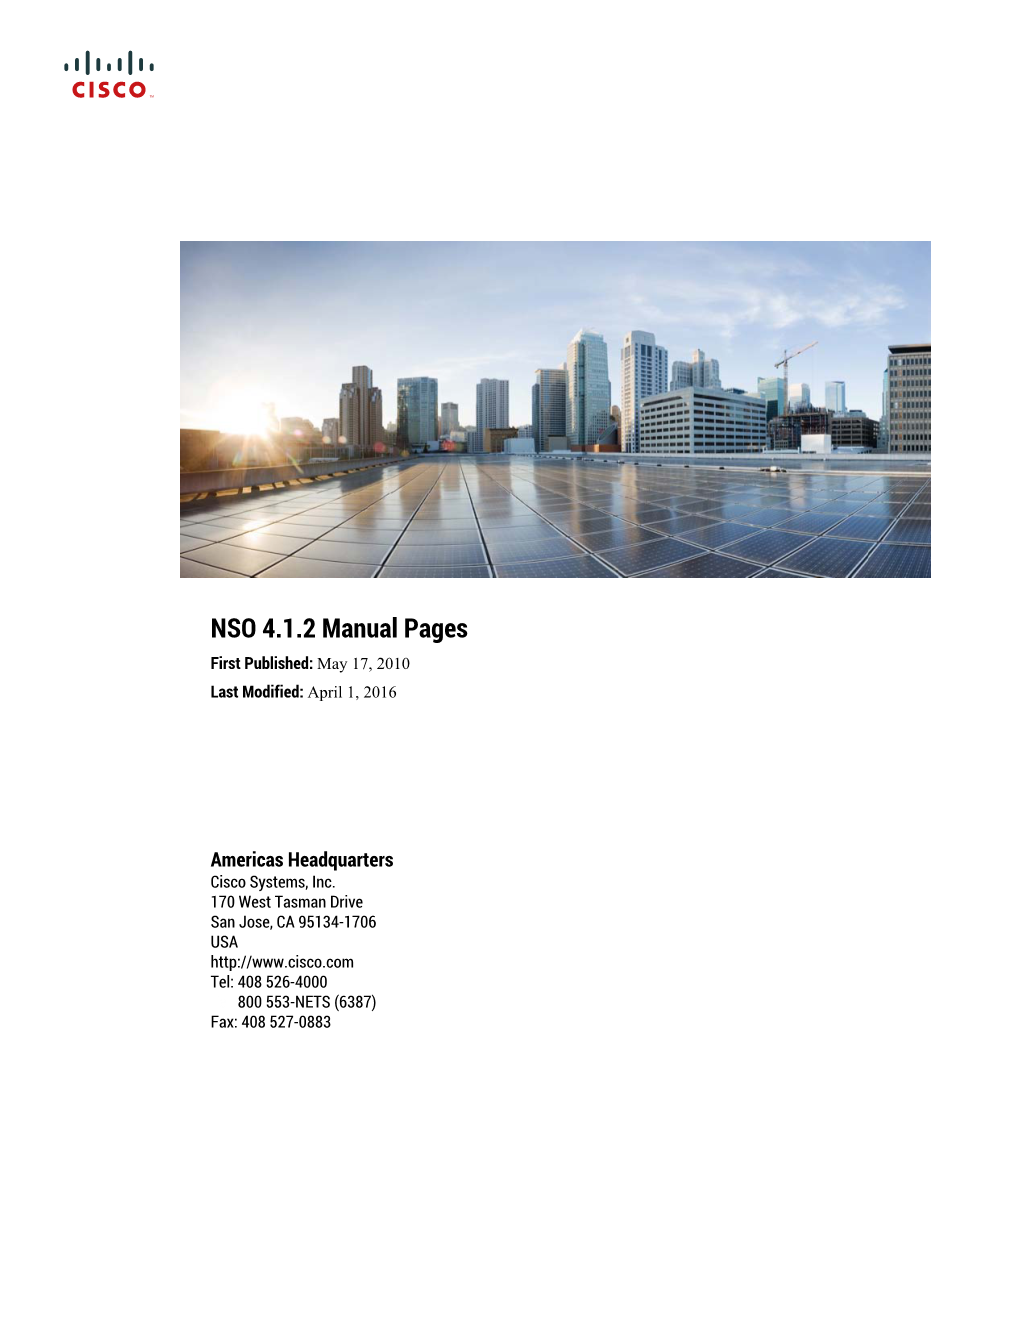 NSO 4.1.2 Manual Pages First Published: May 17, 2010 Last Modified: April 1, 2016